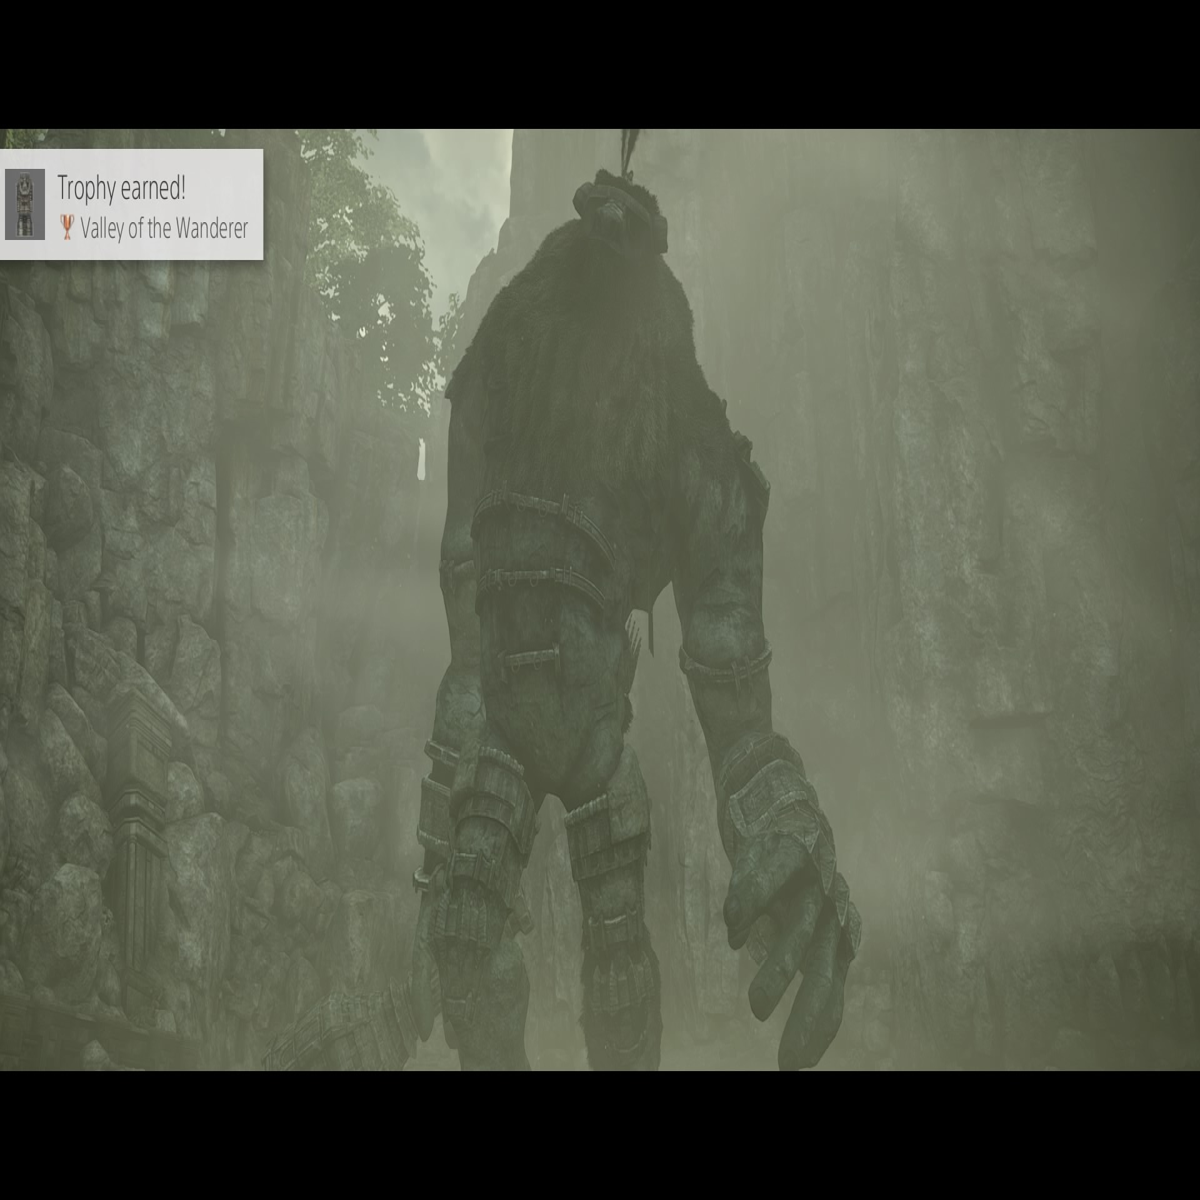 Shadow of the Colossus Remake - First Colossus